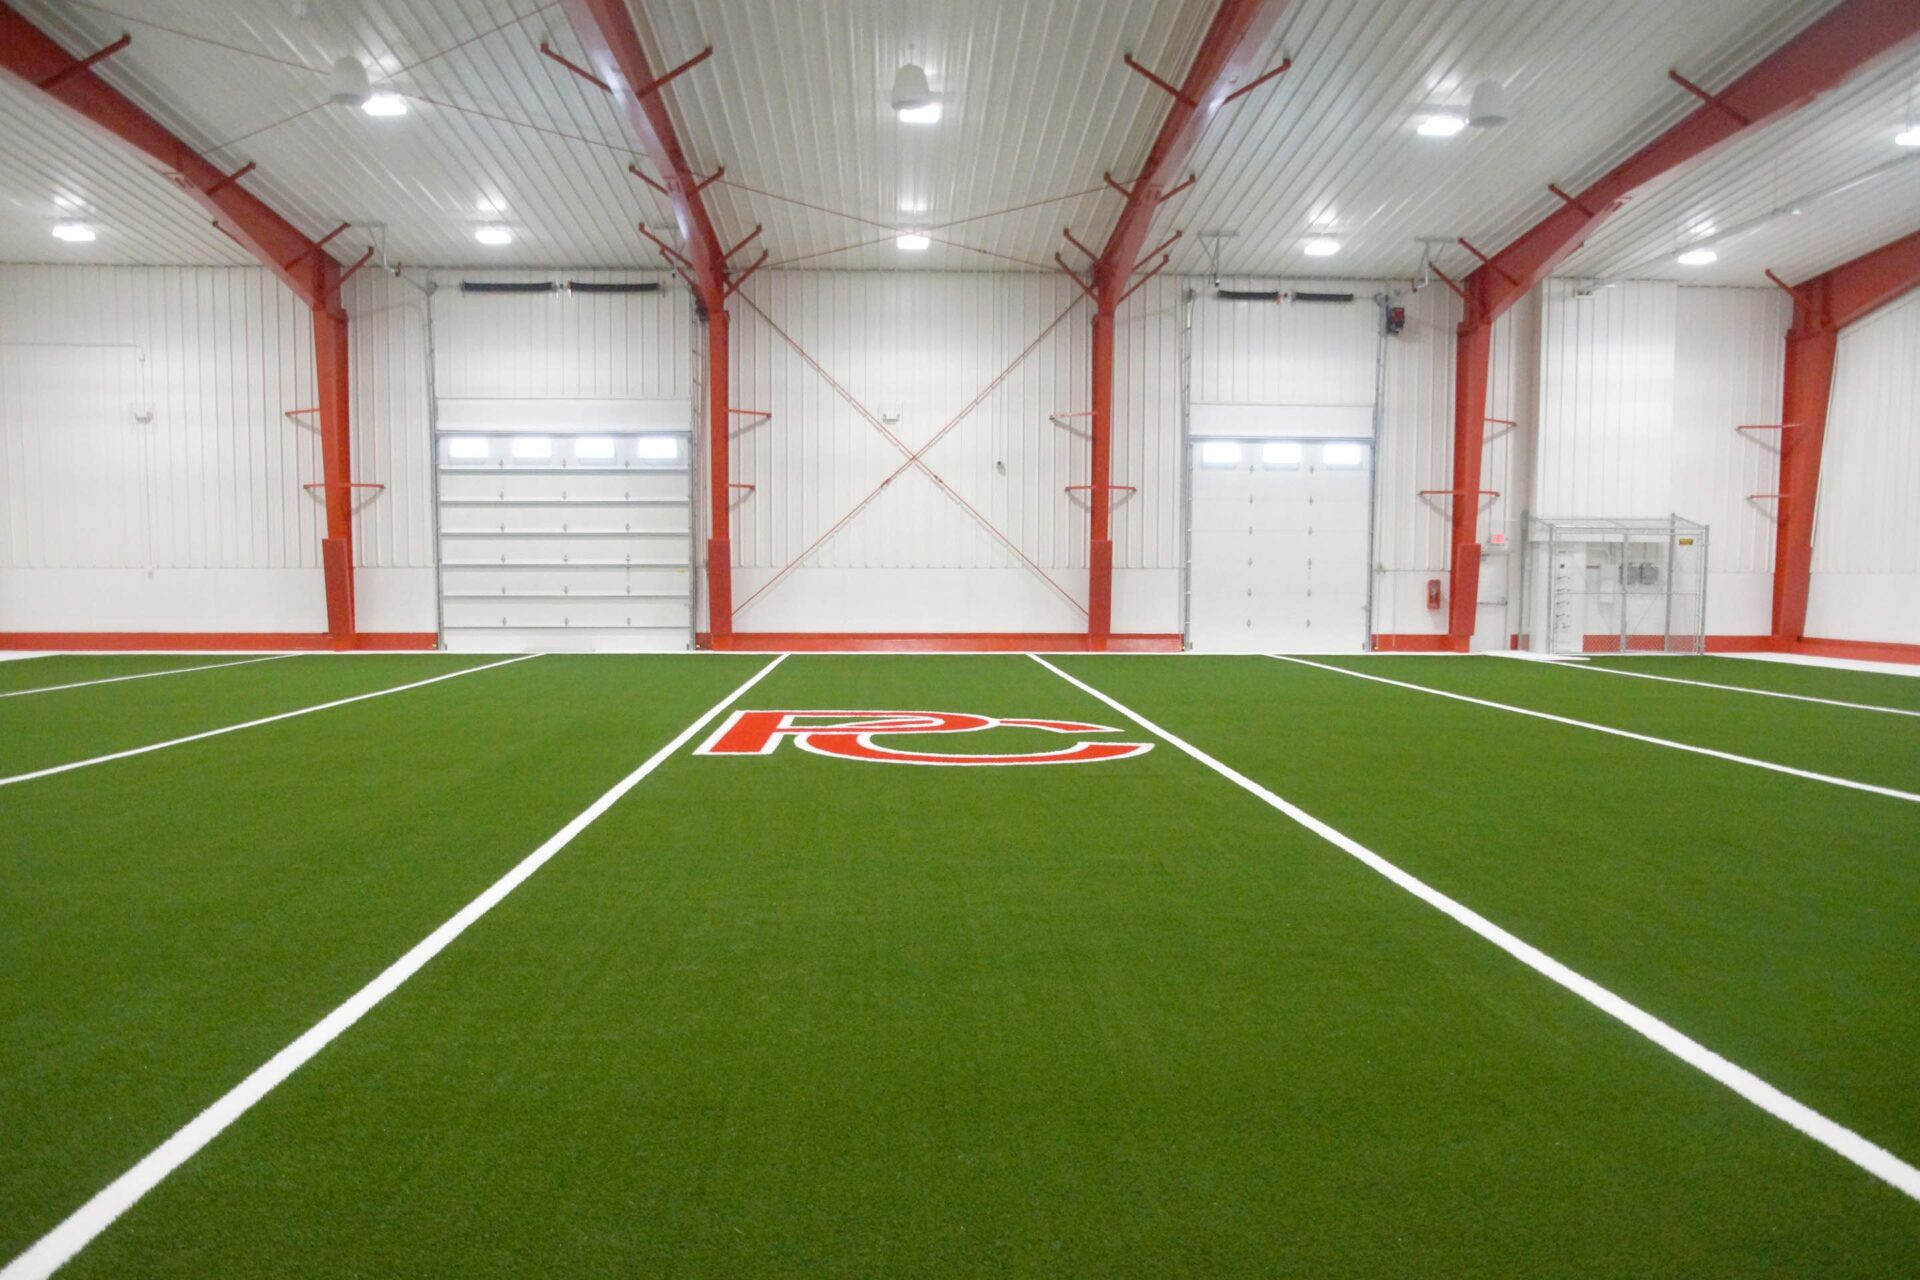 An indoor artificial turf field with white lines and a large logo at the center, within a large white building with red supports.